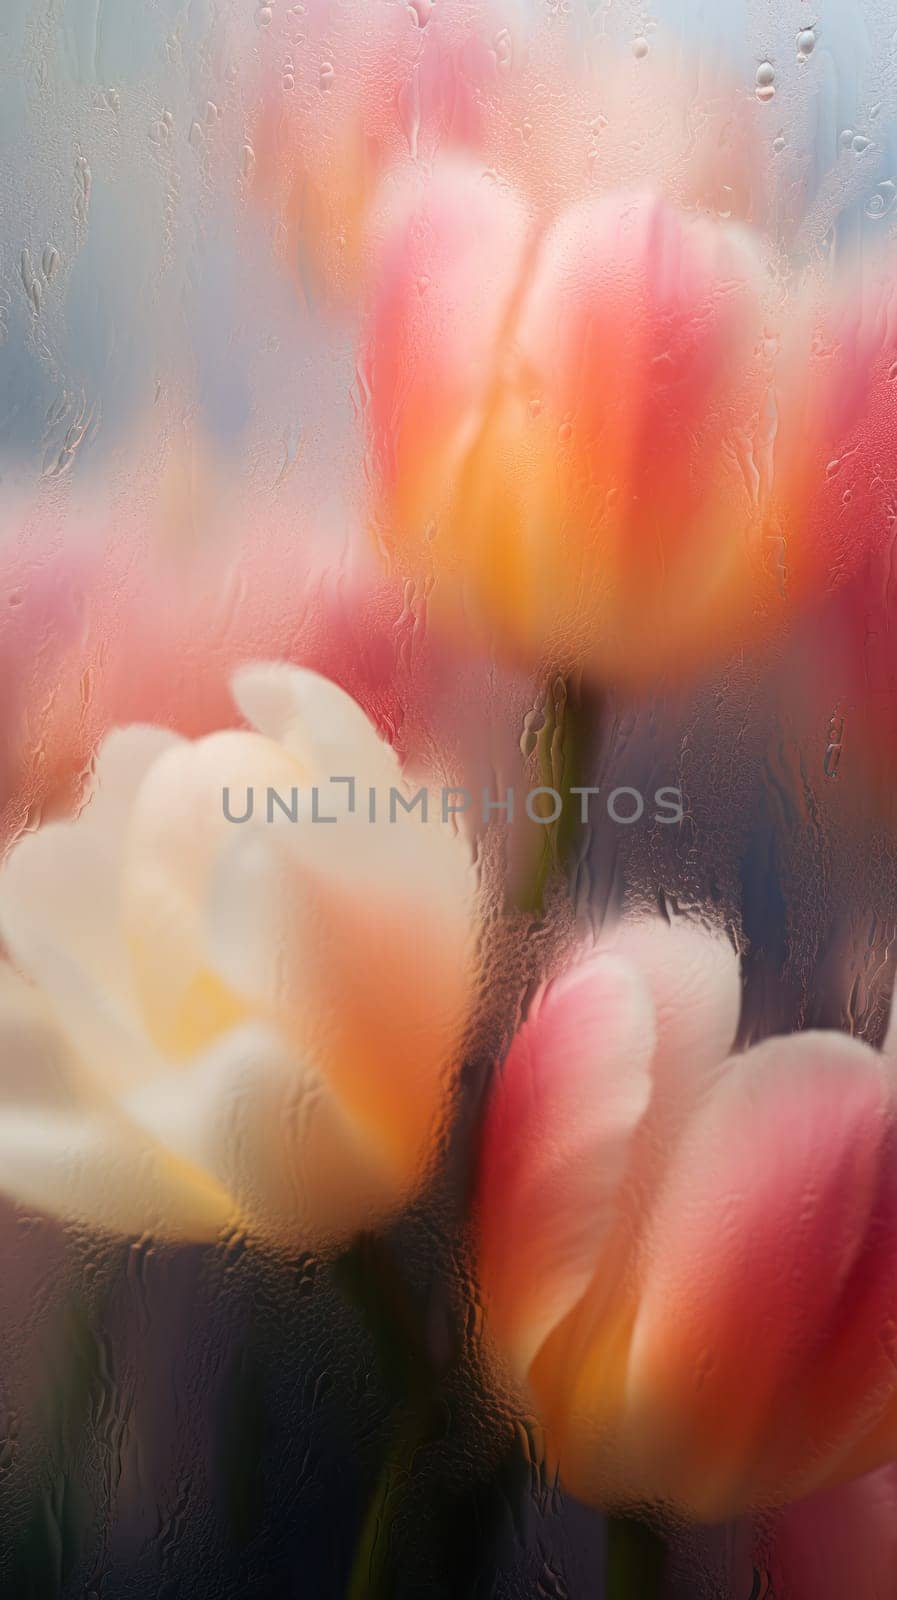 Background of blooming flowers in front of glass with water drops.